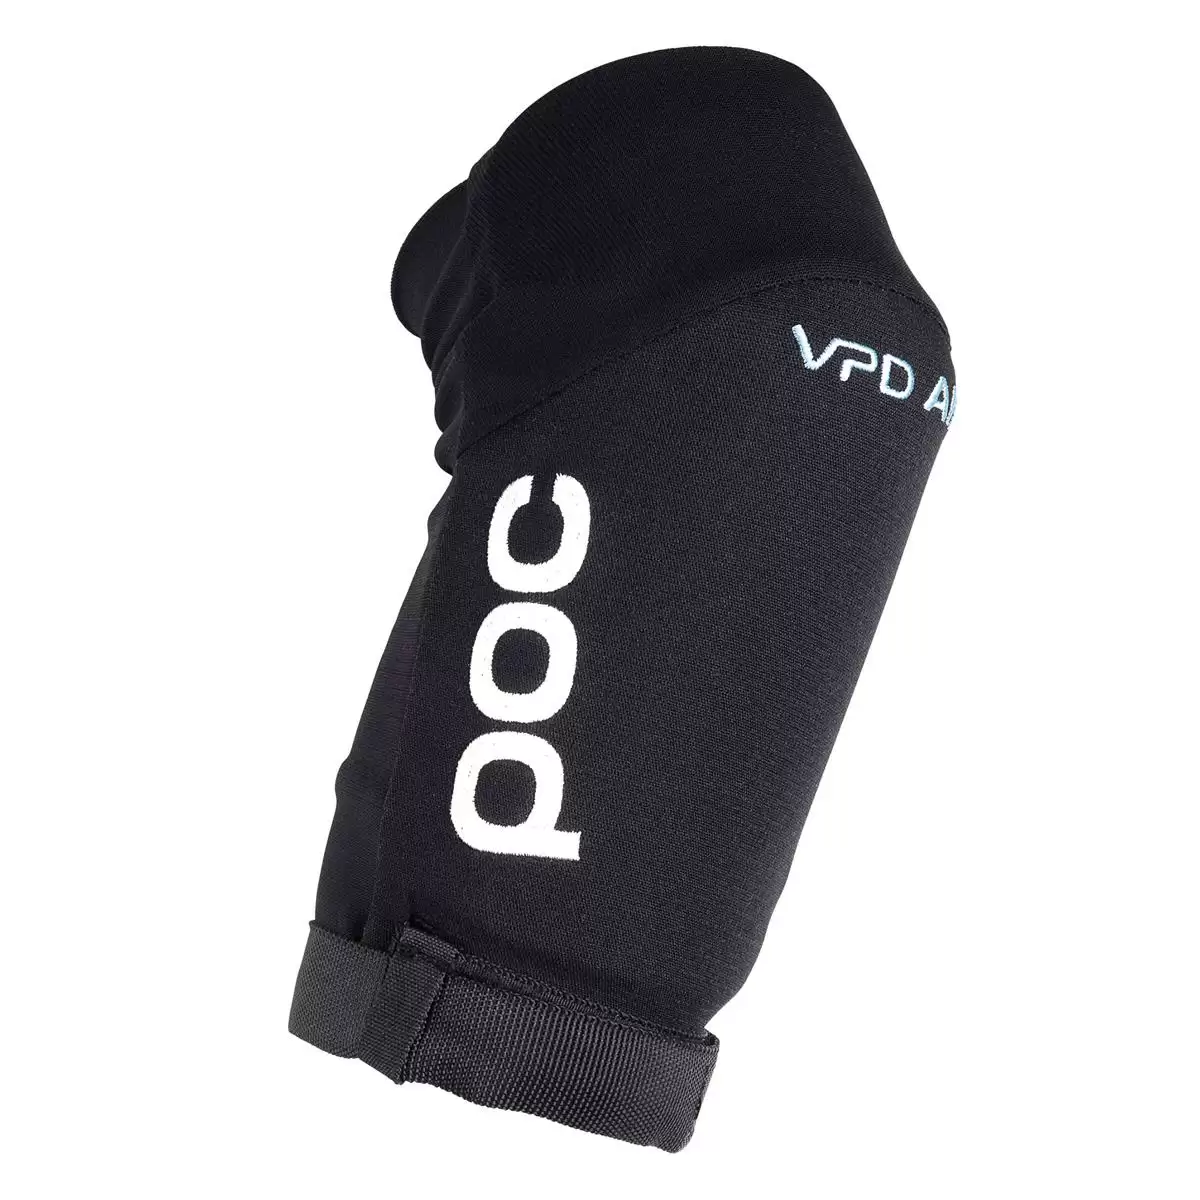 Joint VPD Air Elbow pads Black Size XL - image